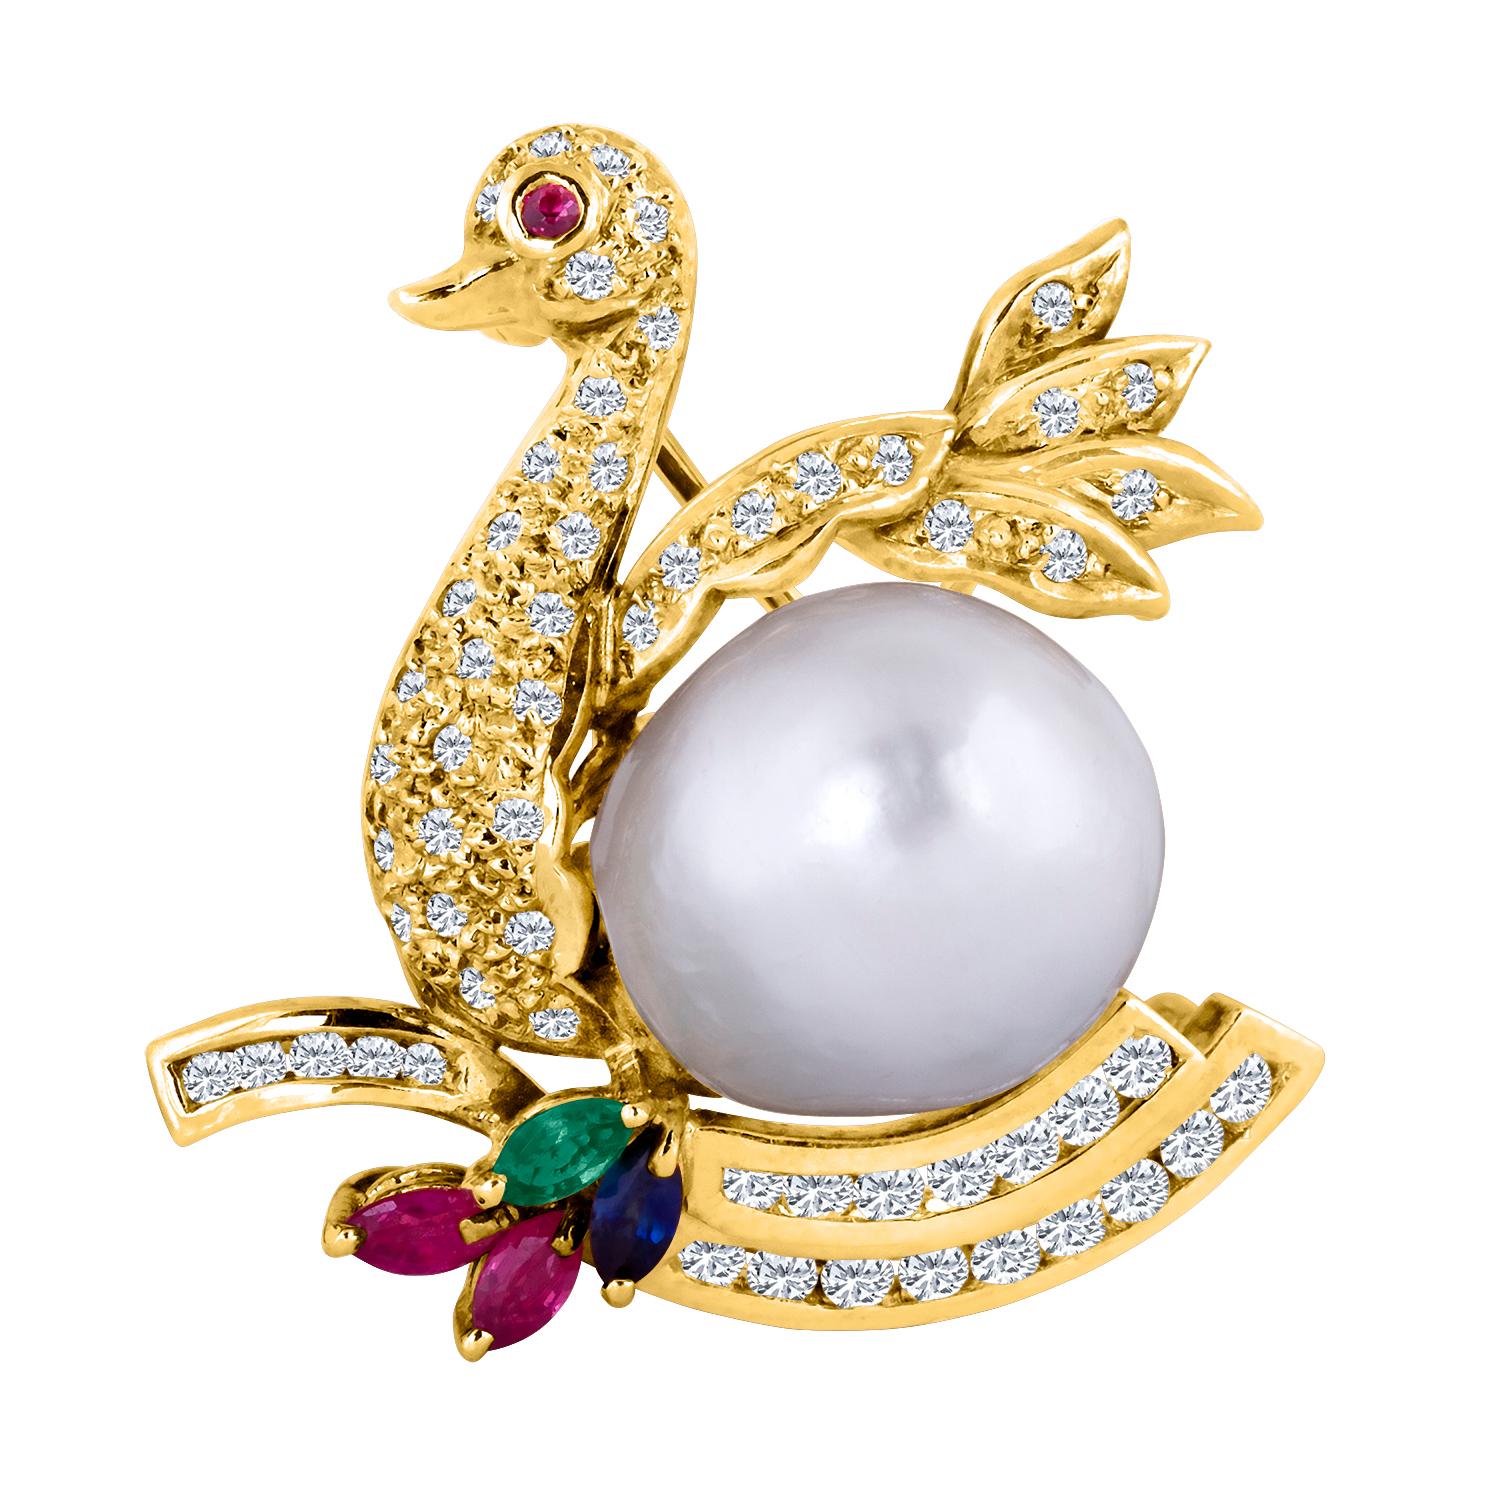 18 Karat Yellow Gold Diamond Swan Brooch with a South Sea Pearl Belly